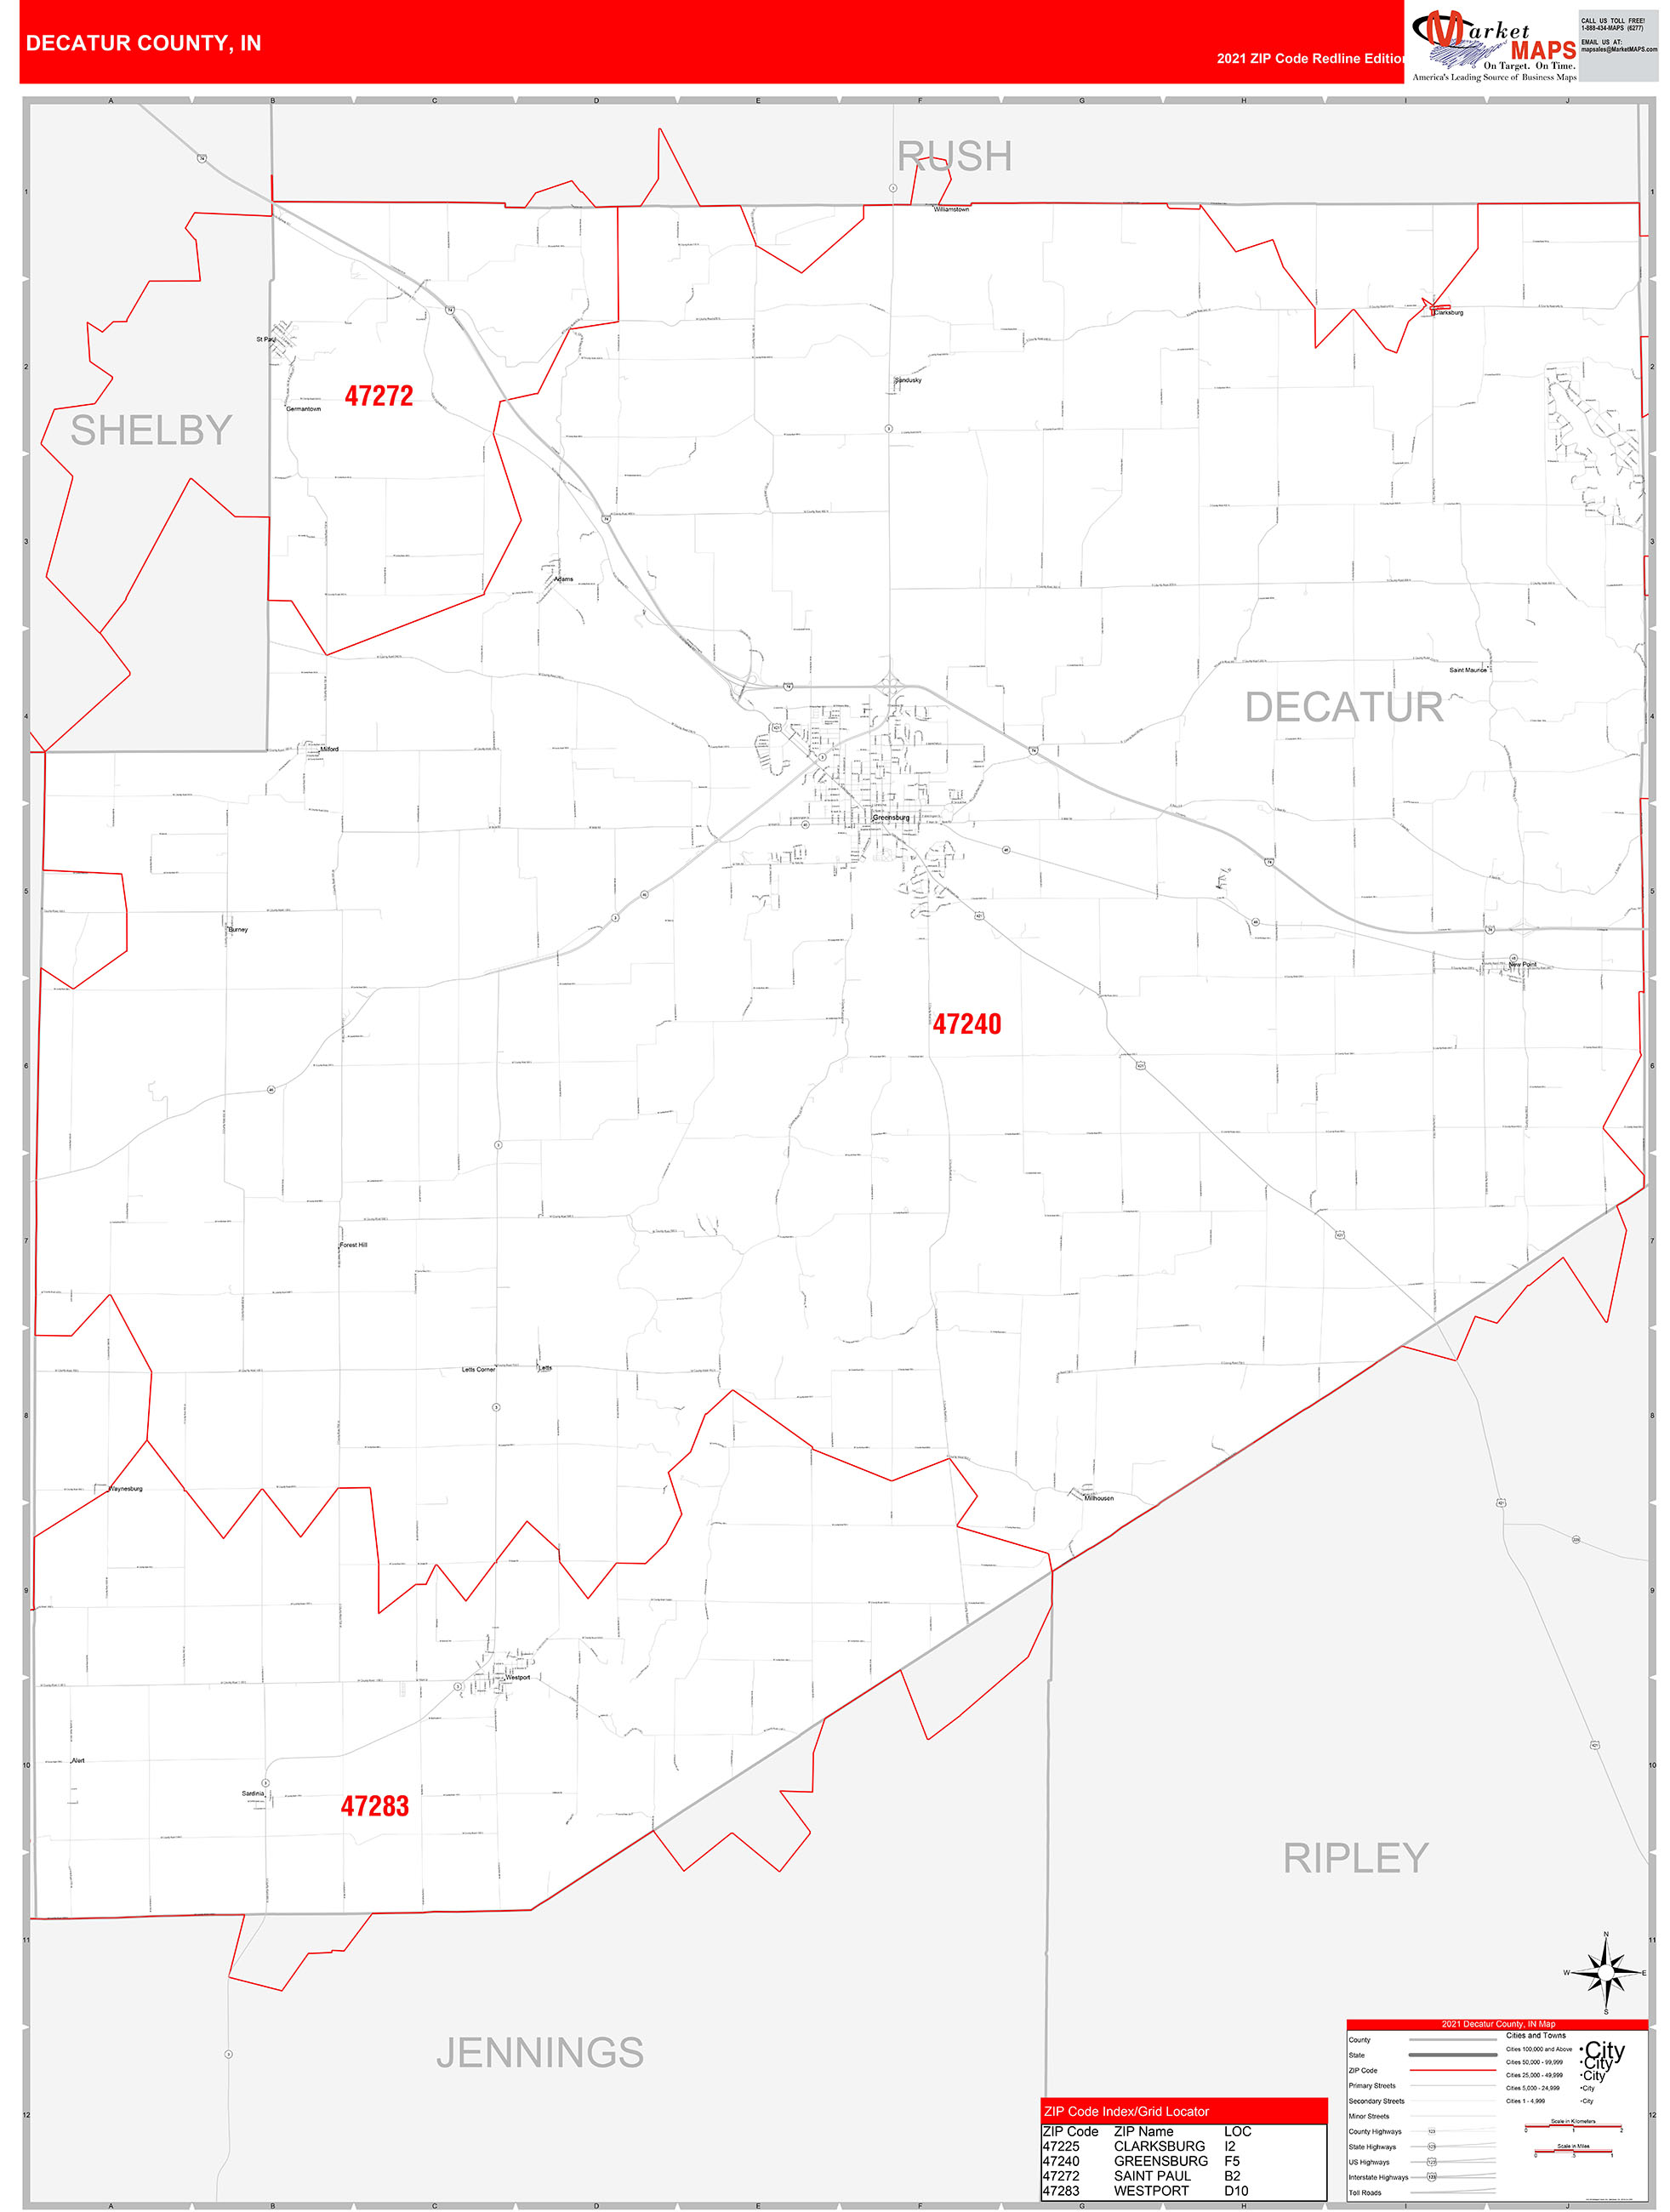 Decatur County, IN Zip Code Wall Map Red Line Style by MarketMAPS